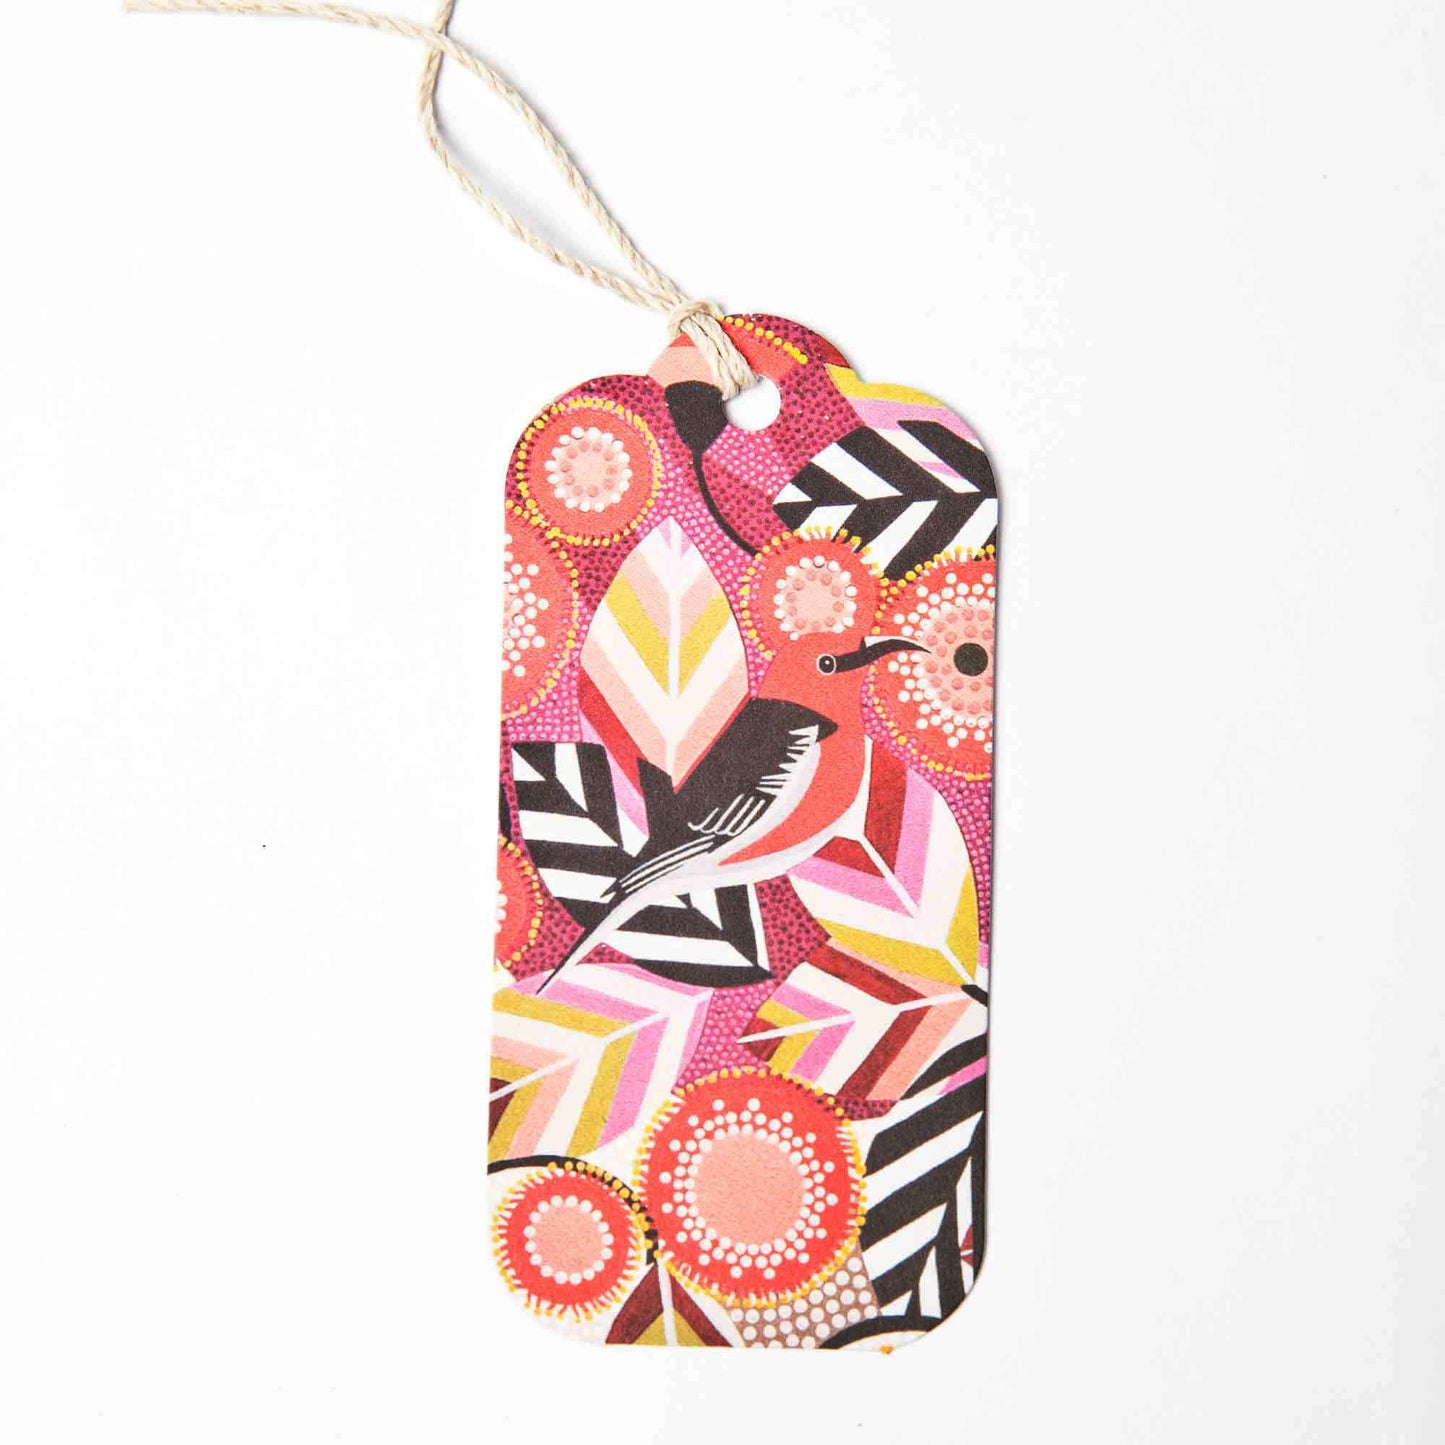 Earth Greetings Coral Gum Earth Greetings Gift Tag. Beautiful design with bird and leaves and aboriginal patterns.